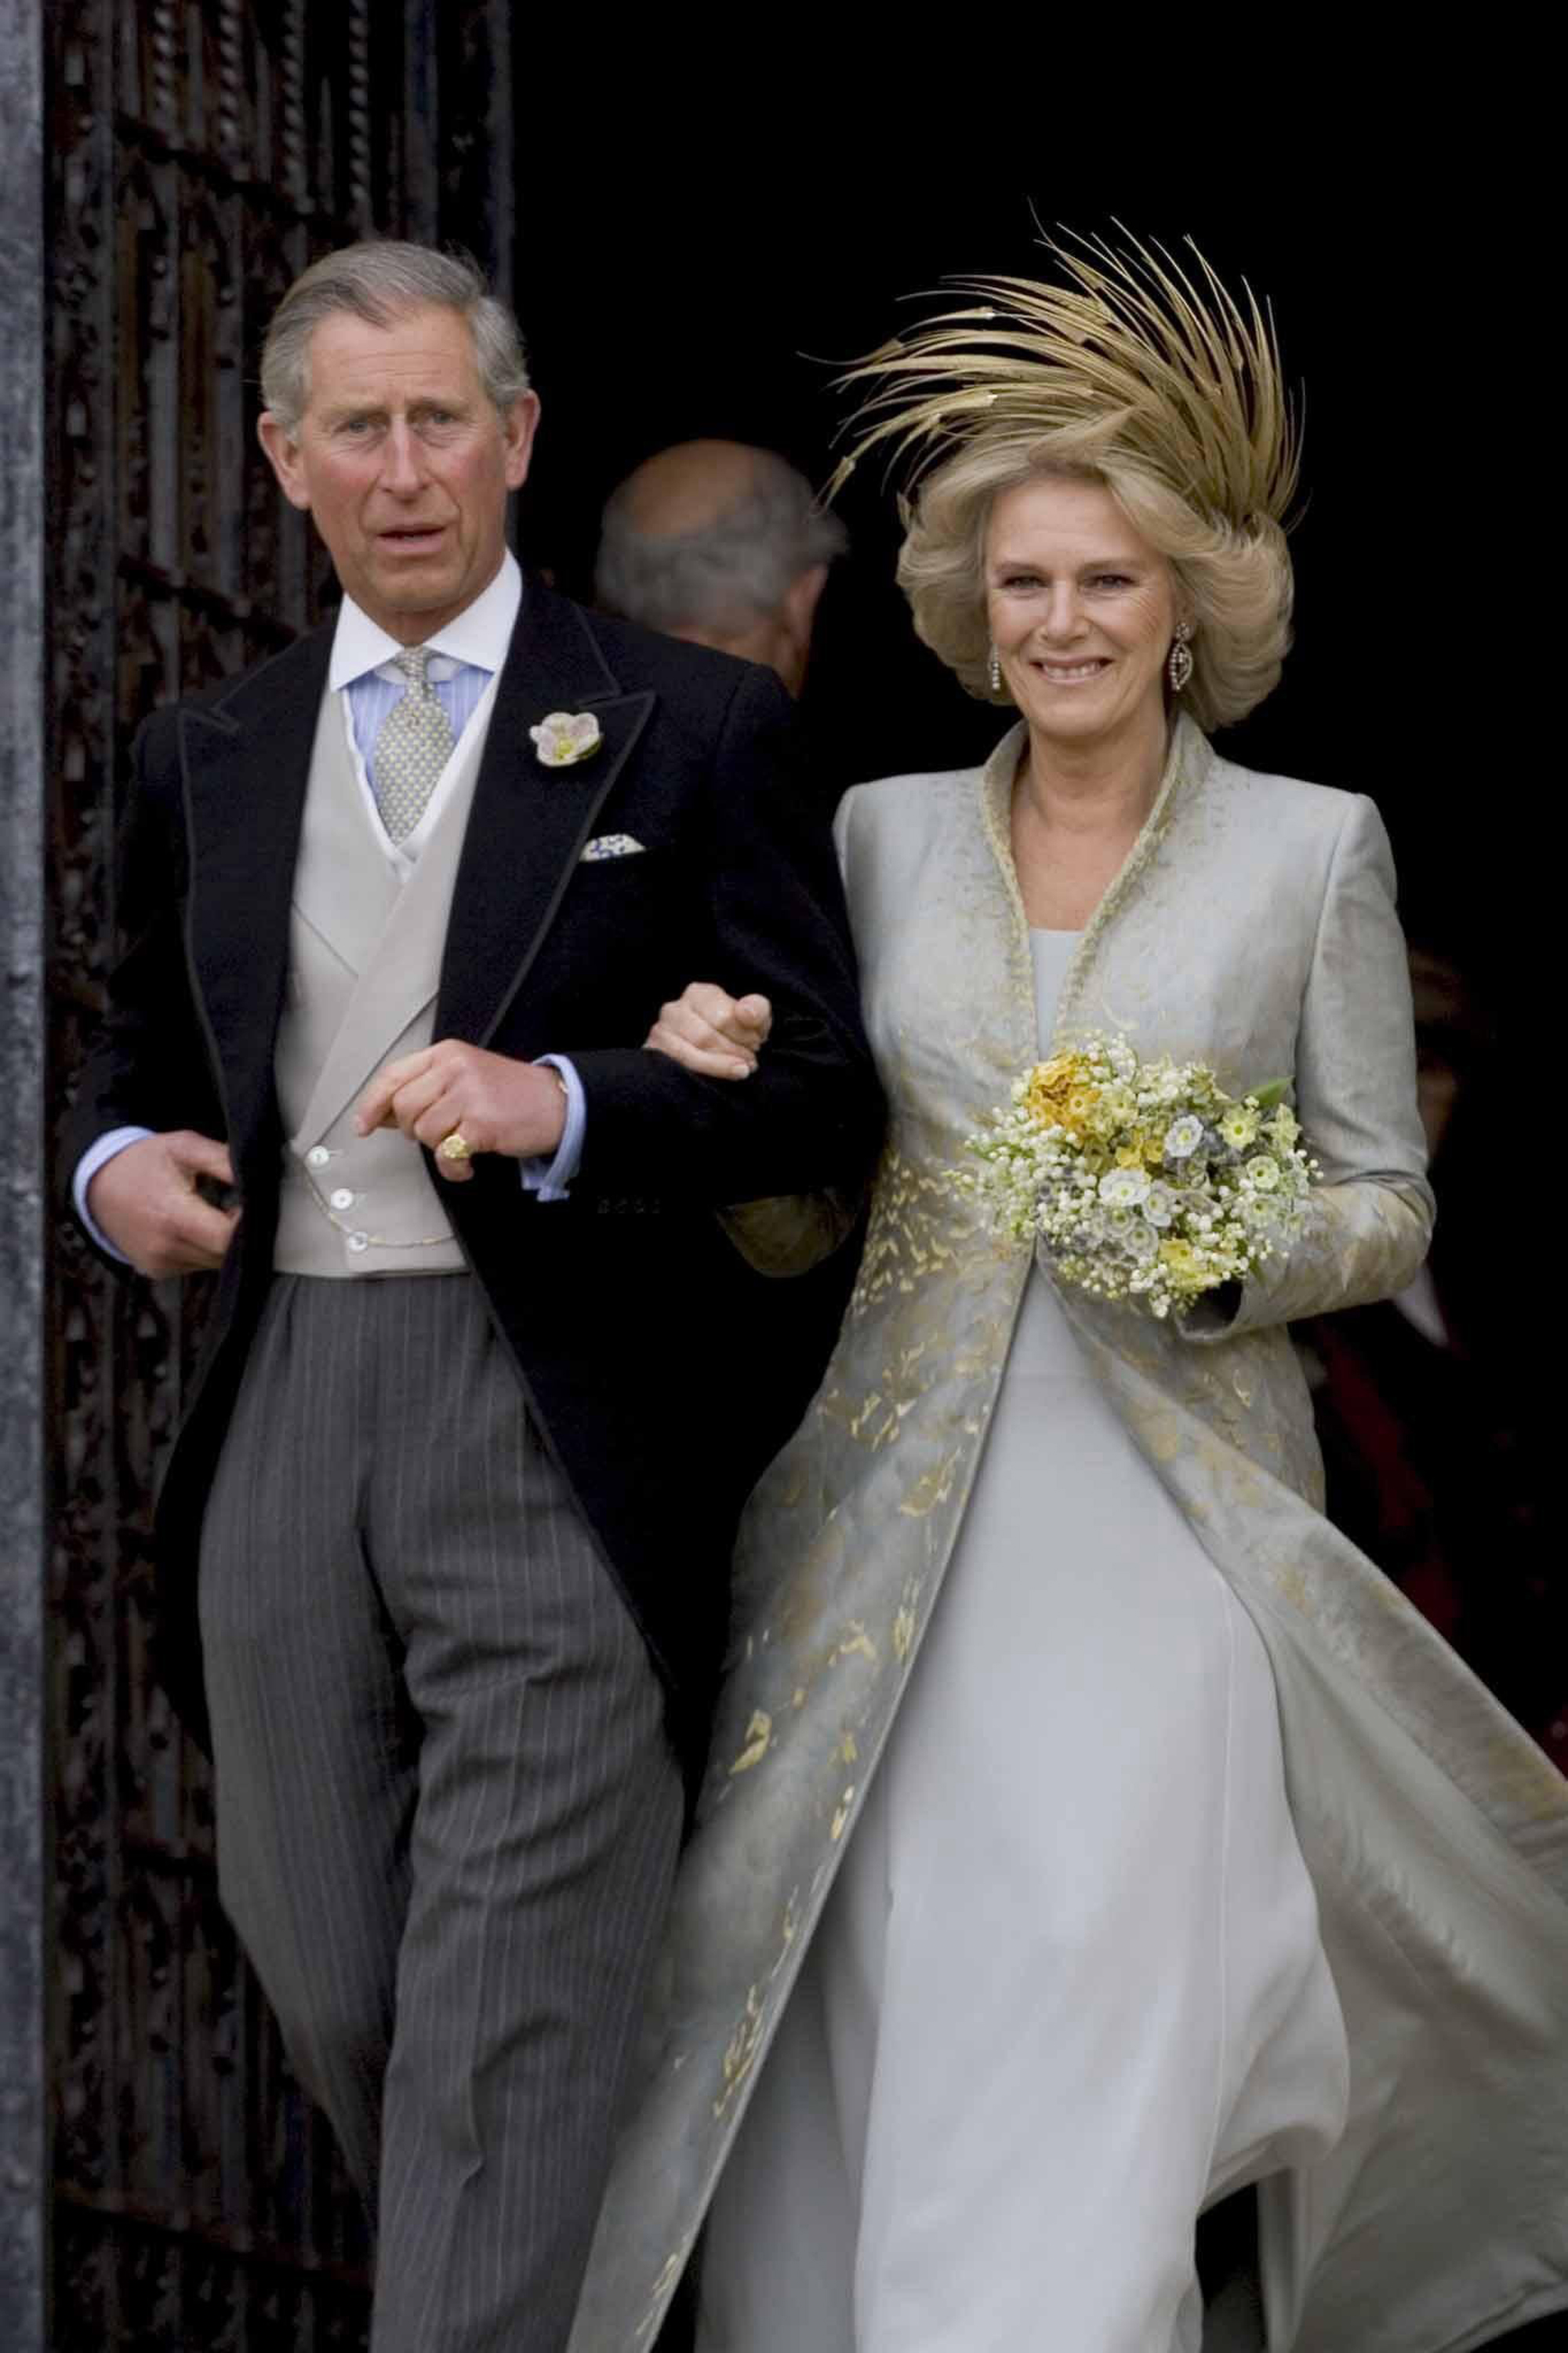 The Prince of Wales and his bride Camilla, Duchess of Cornwall leave St George's Chapel in Windsor, following their wedding